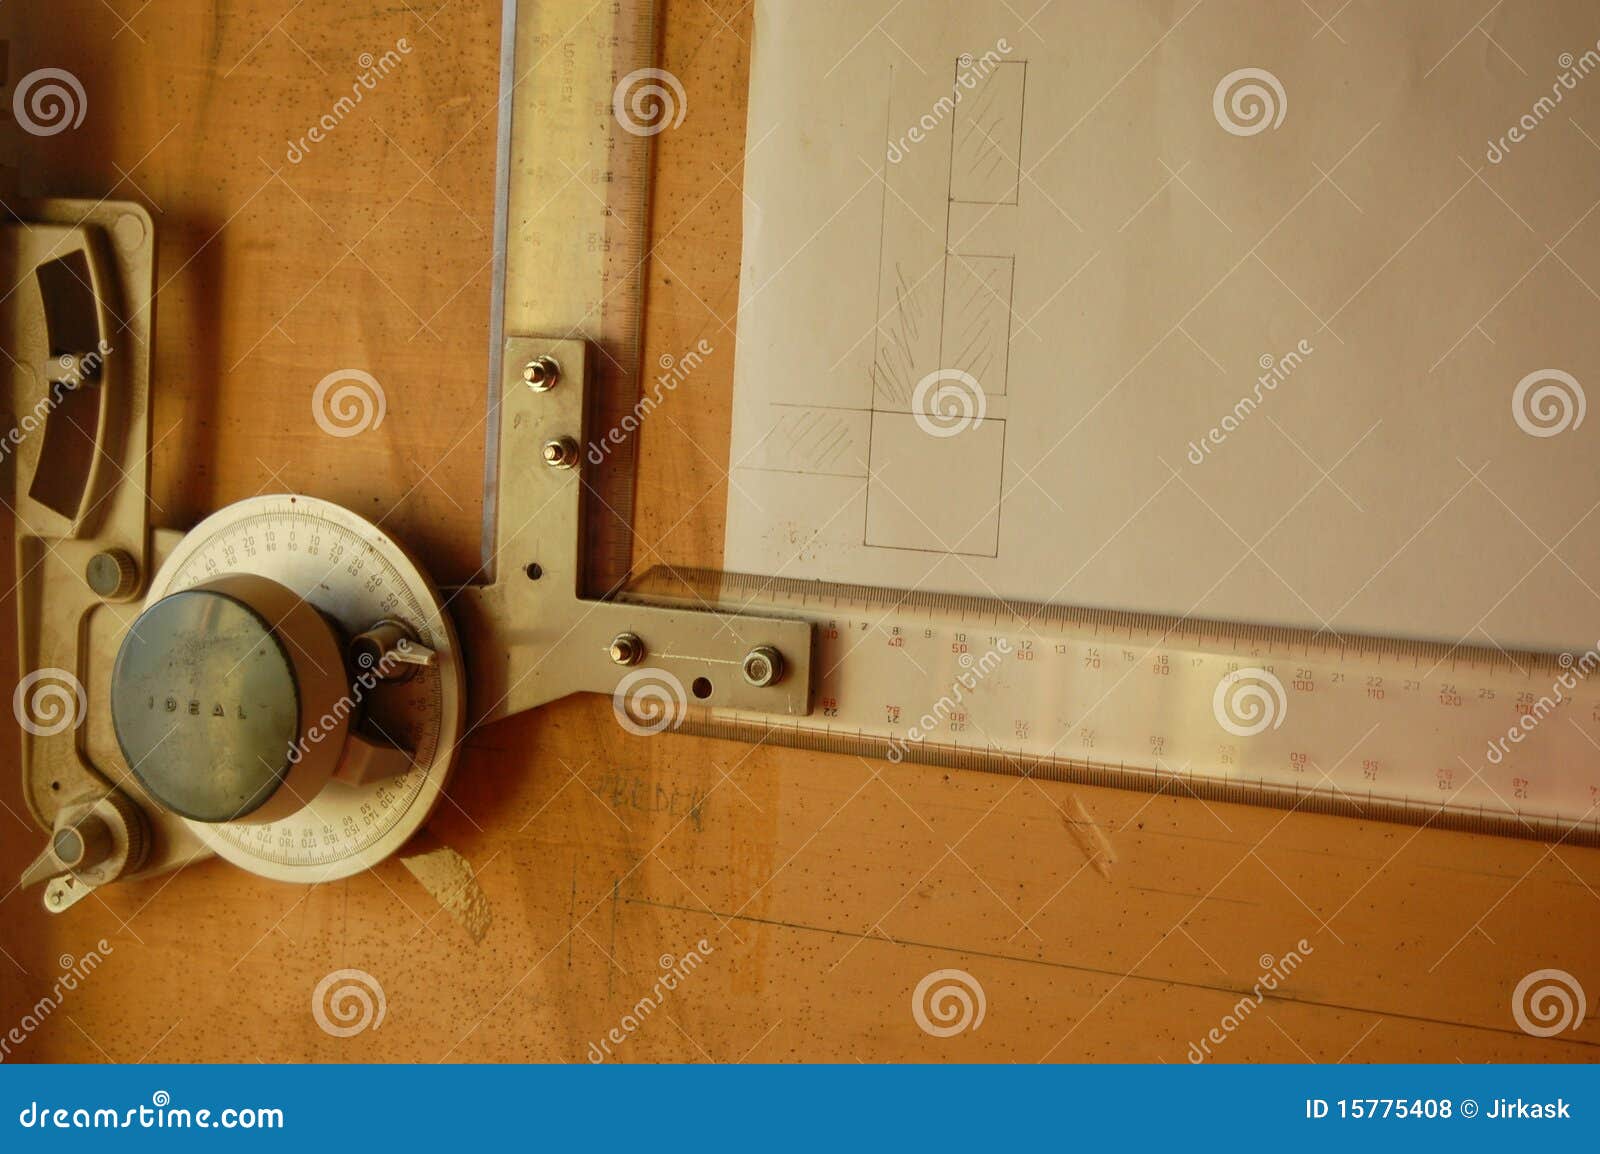 Drawing board stock photo. Image of ruler, drawing, workshop - 15775408